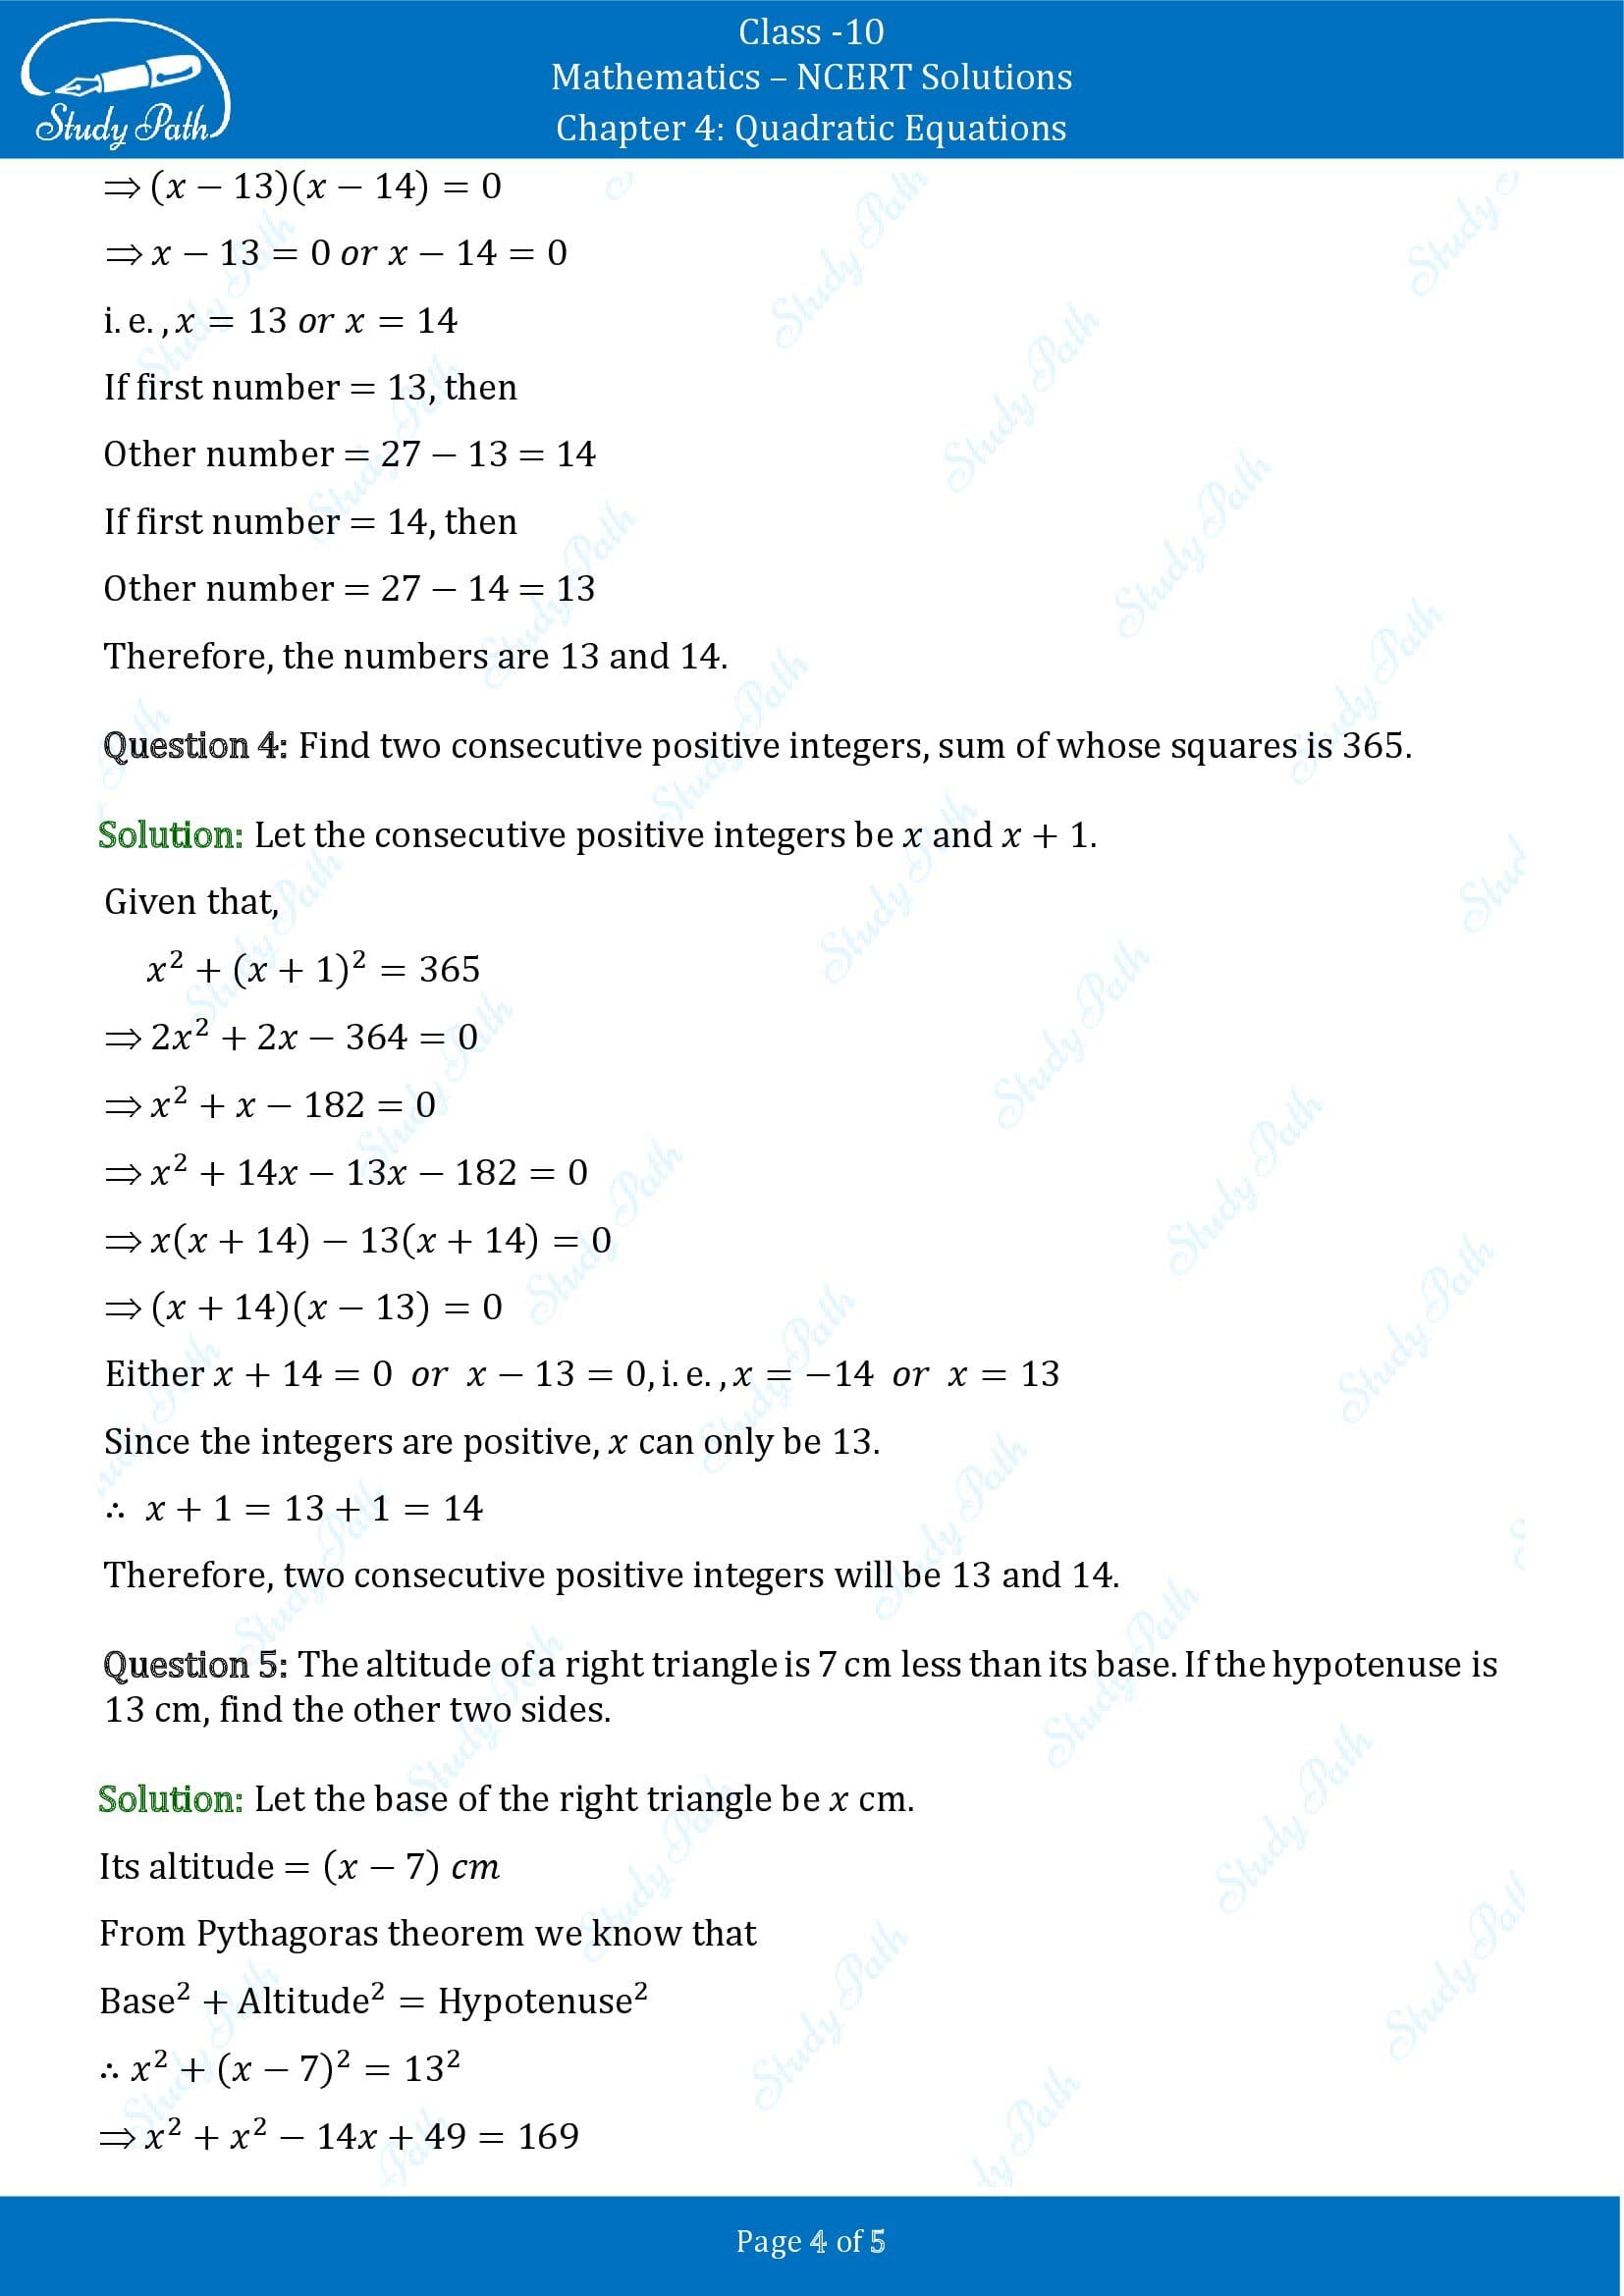 NCERT Solutions for Class 10 Maths Chapter 4 Quadratic Equations Exercise 4.2 00004